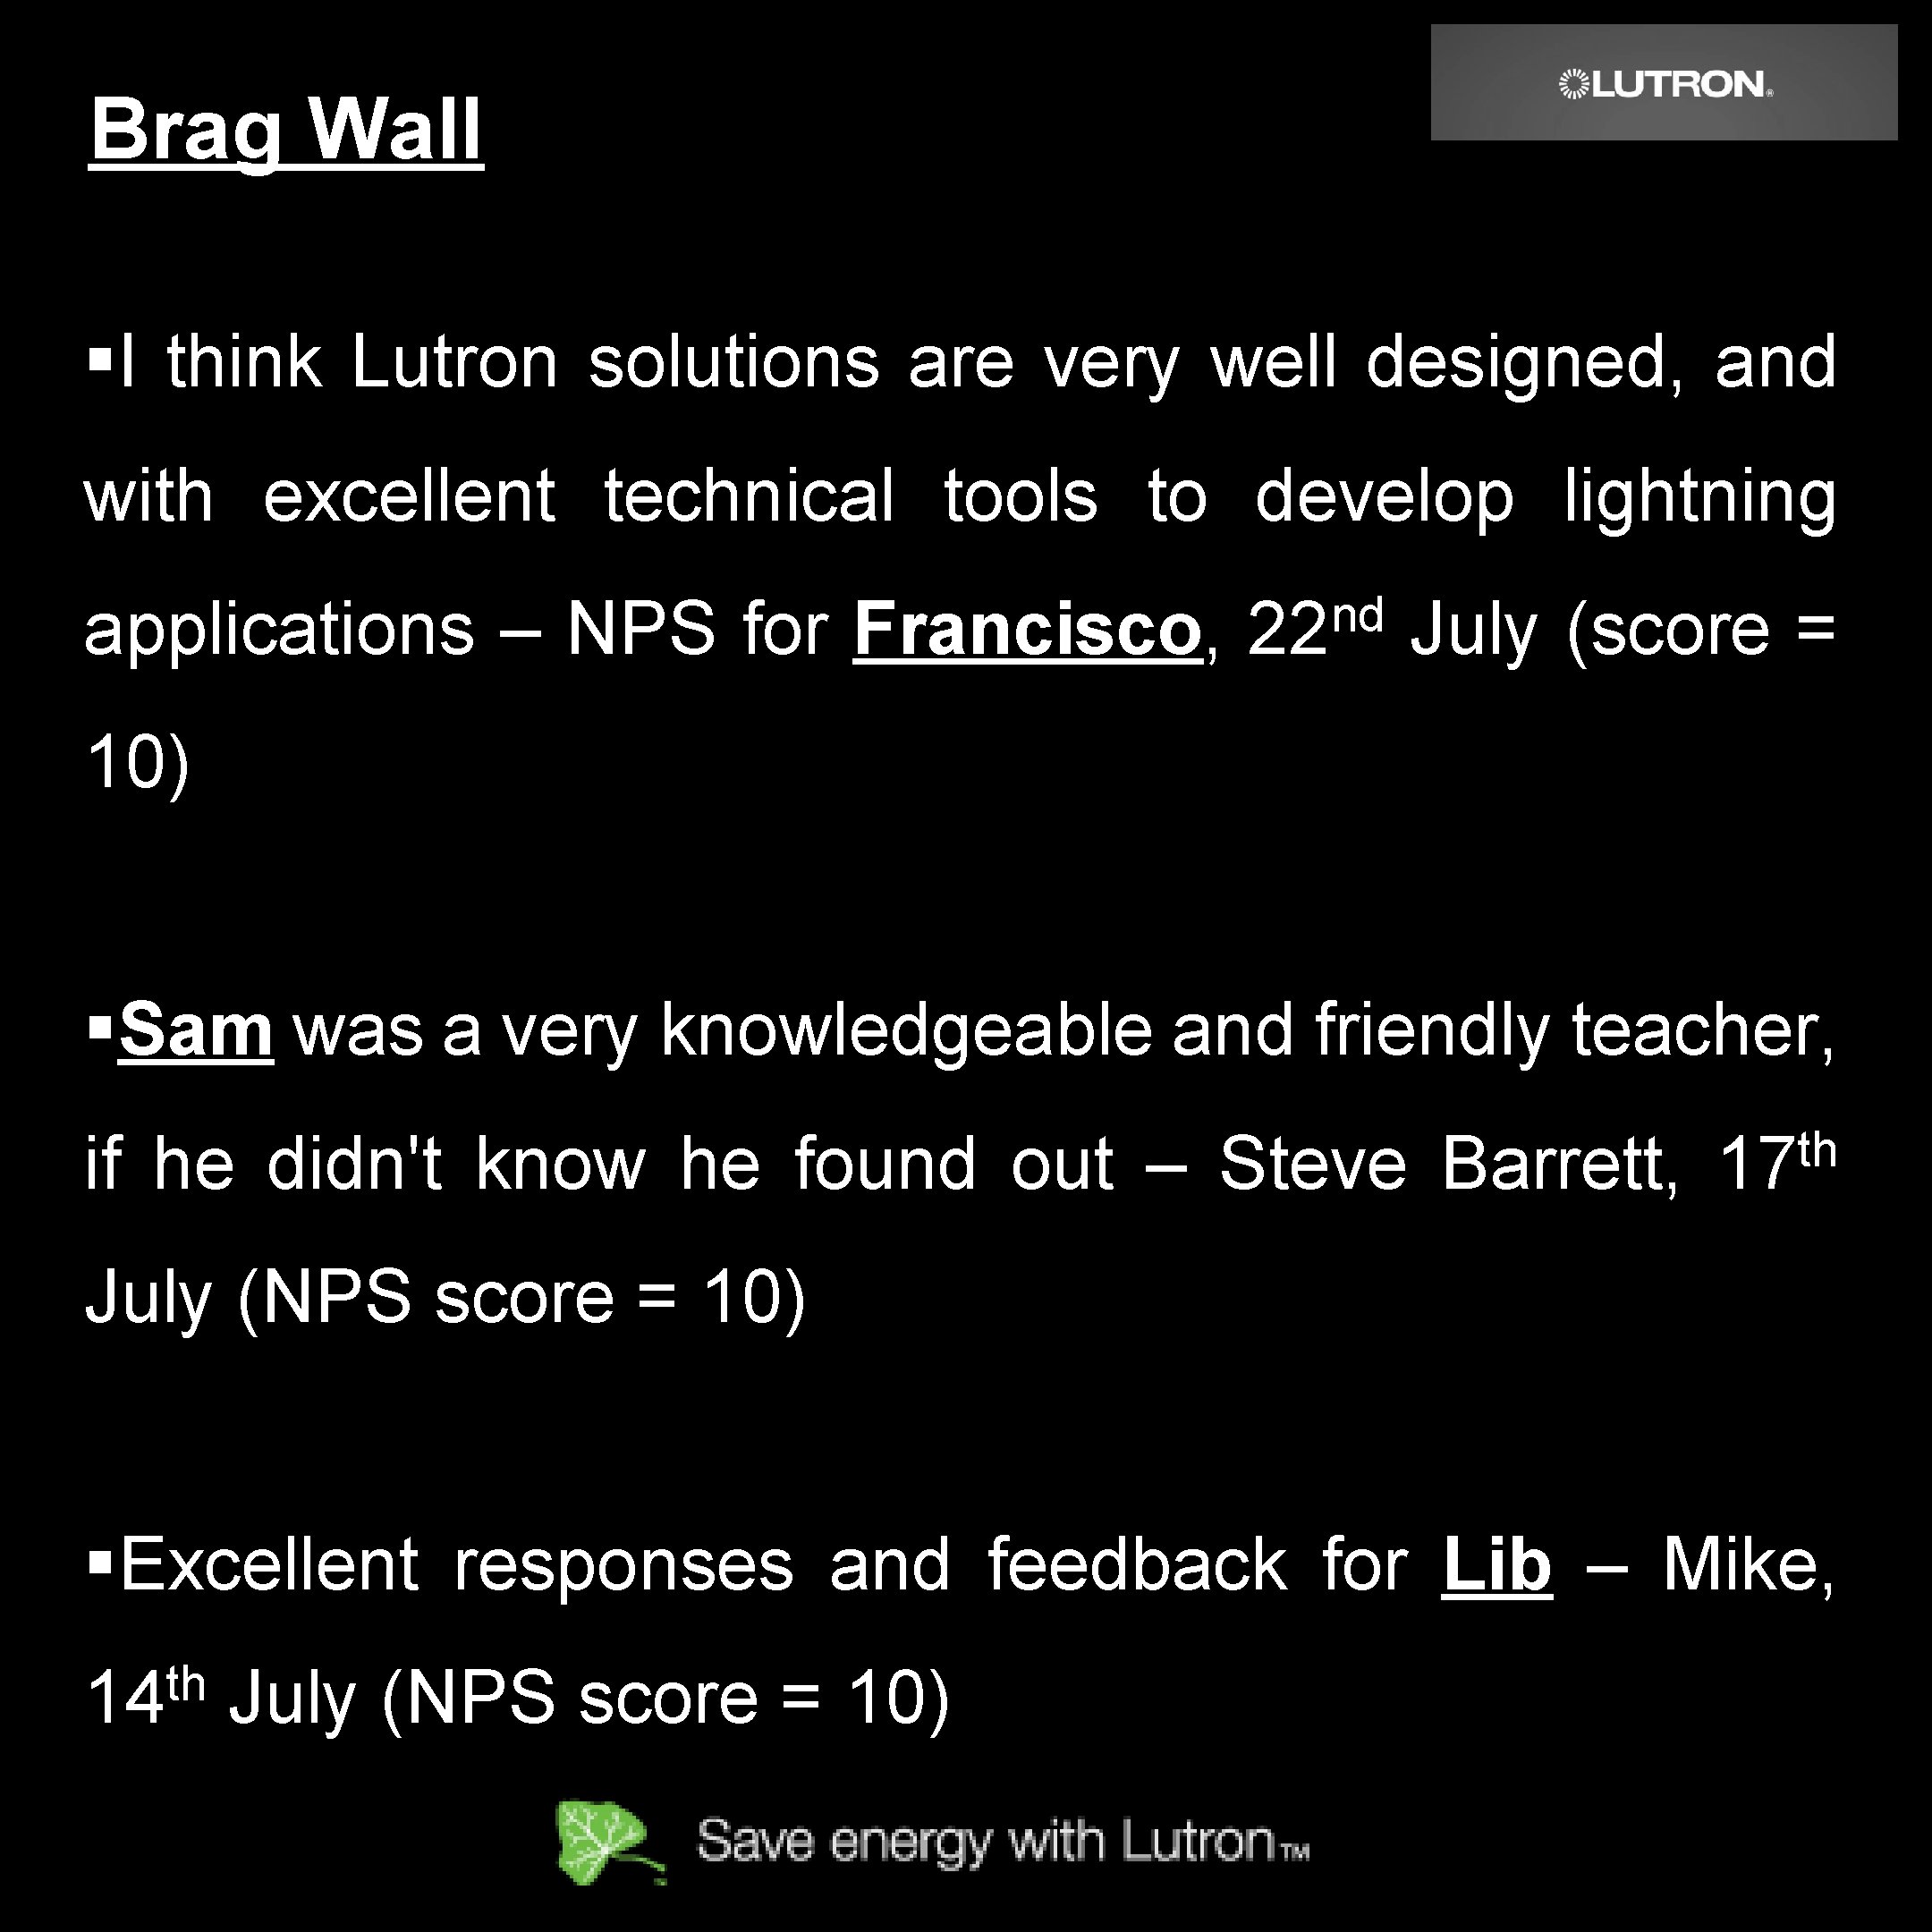 Brag Wall §I think Lutron solutions are very well designed, and with excellent technical